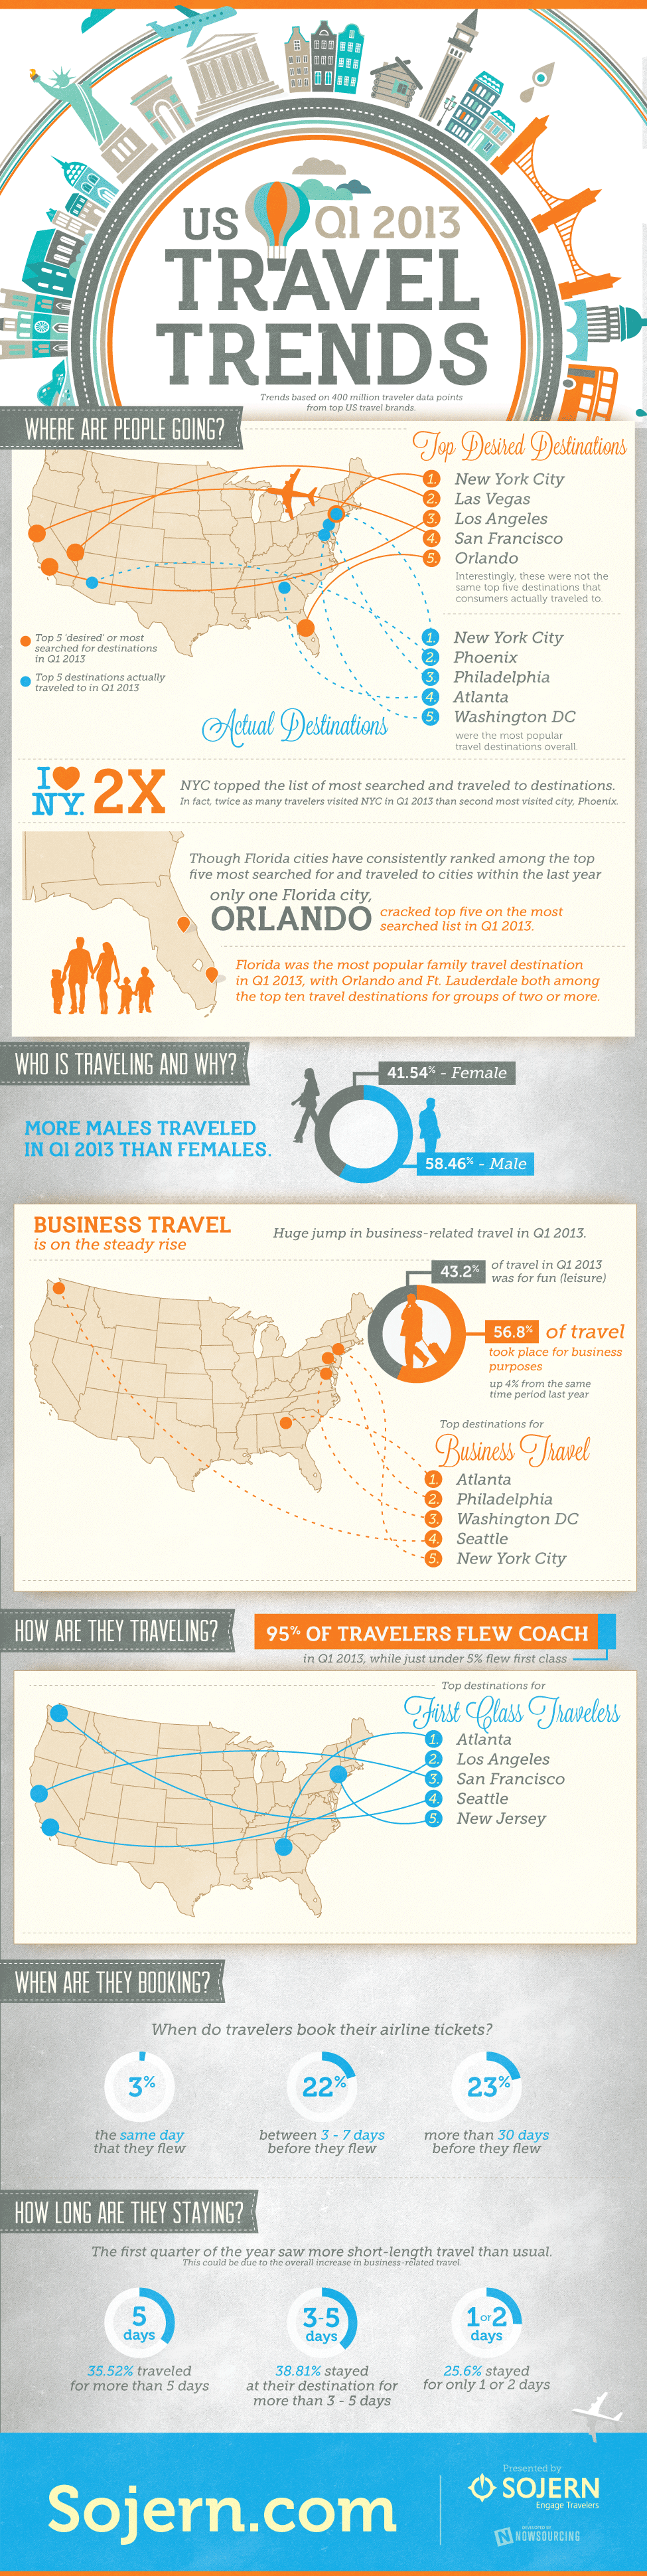 US Travel Trends for Q10 100103 [Infographic] - Business 10 Community